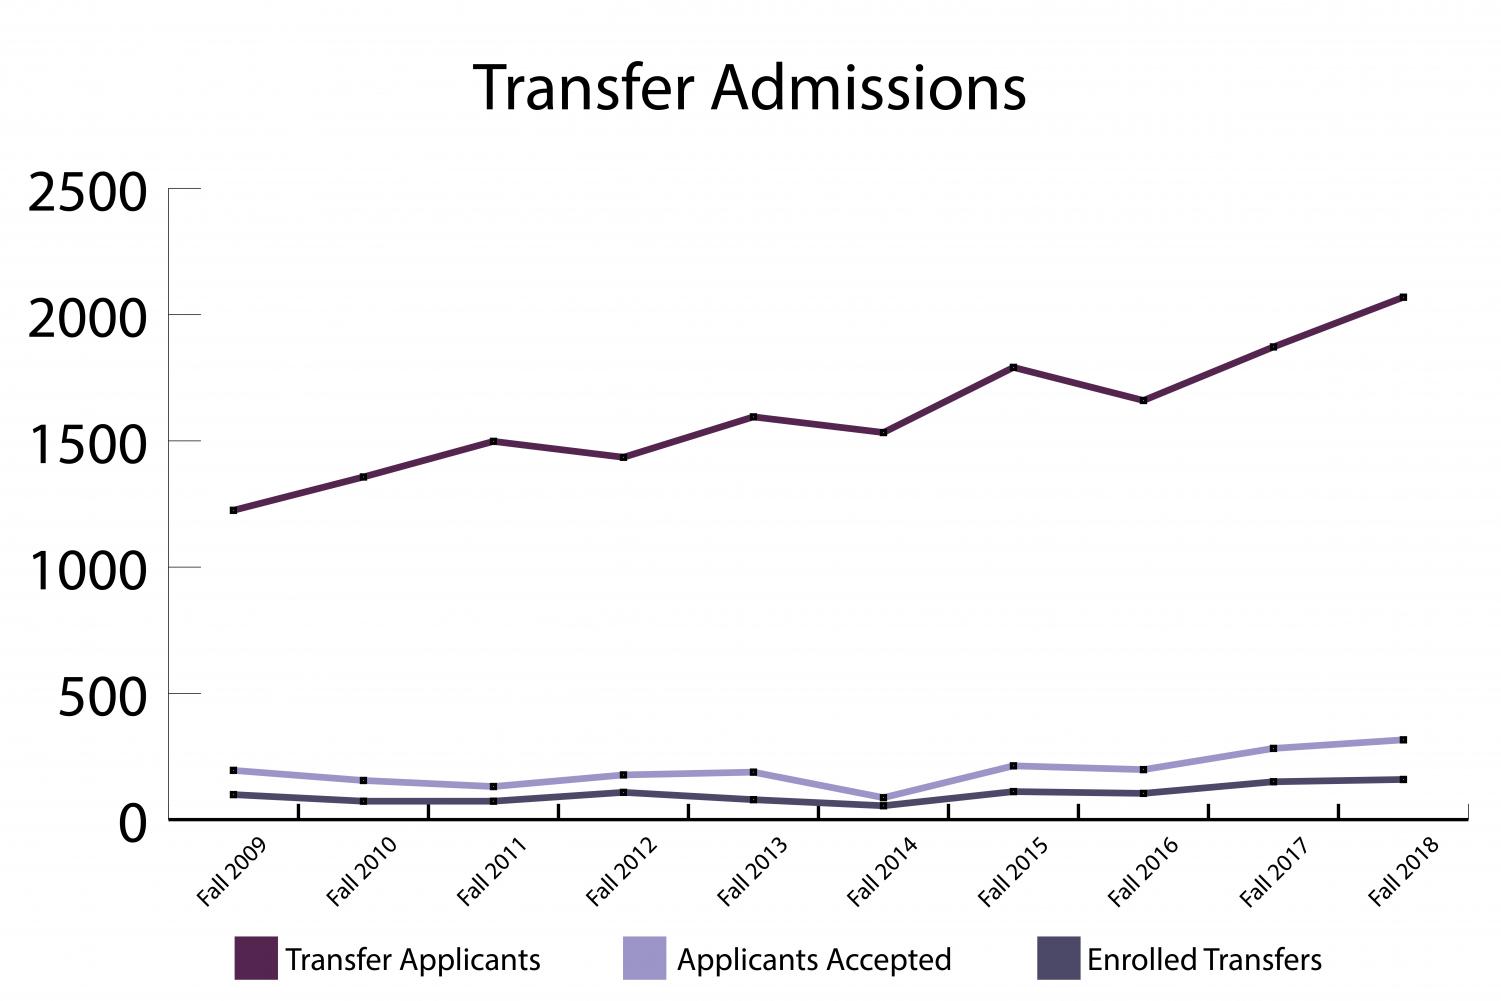 Despite+record+increases+in+numbers%2C+transfer+students+struggle+to+adjust